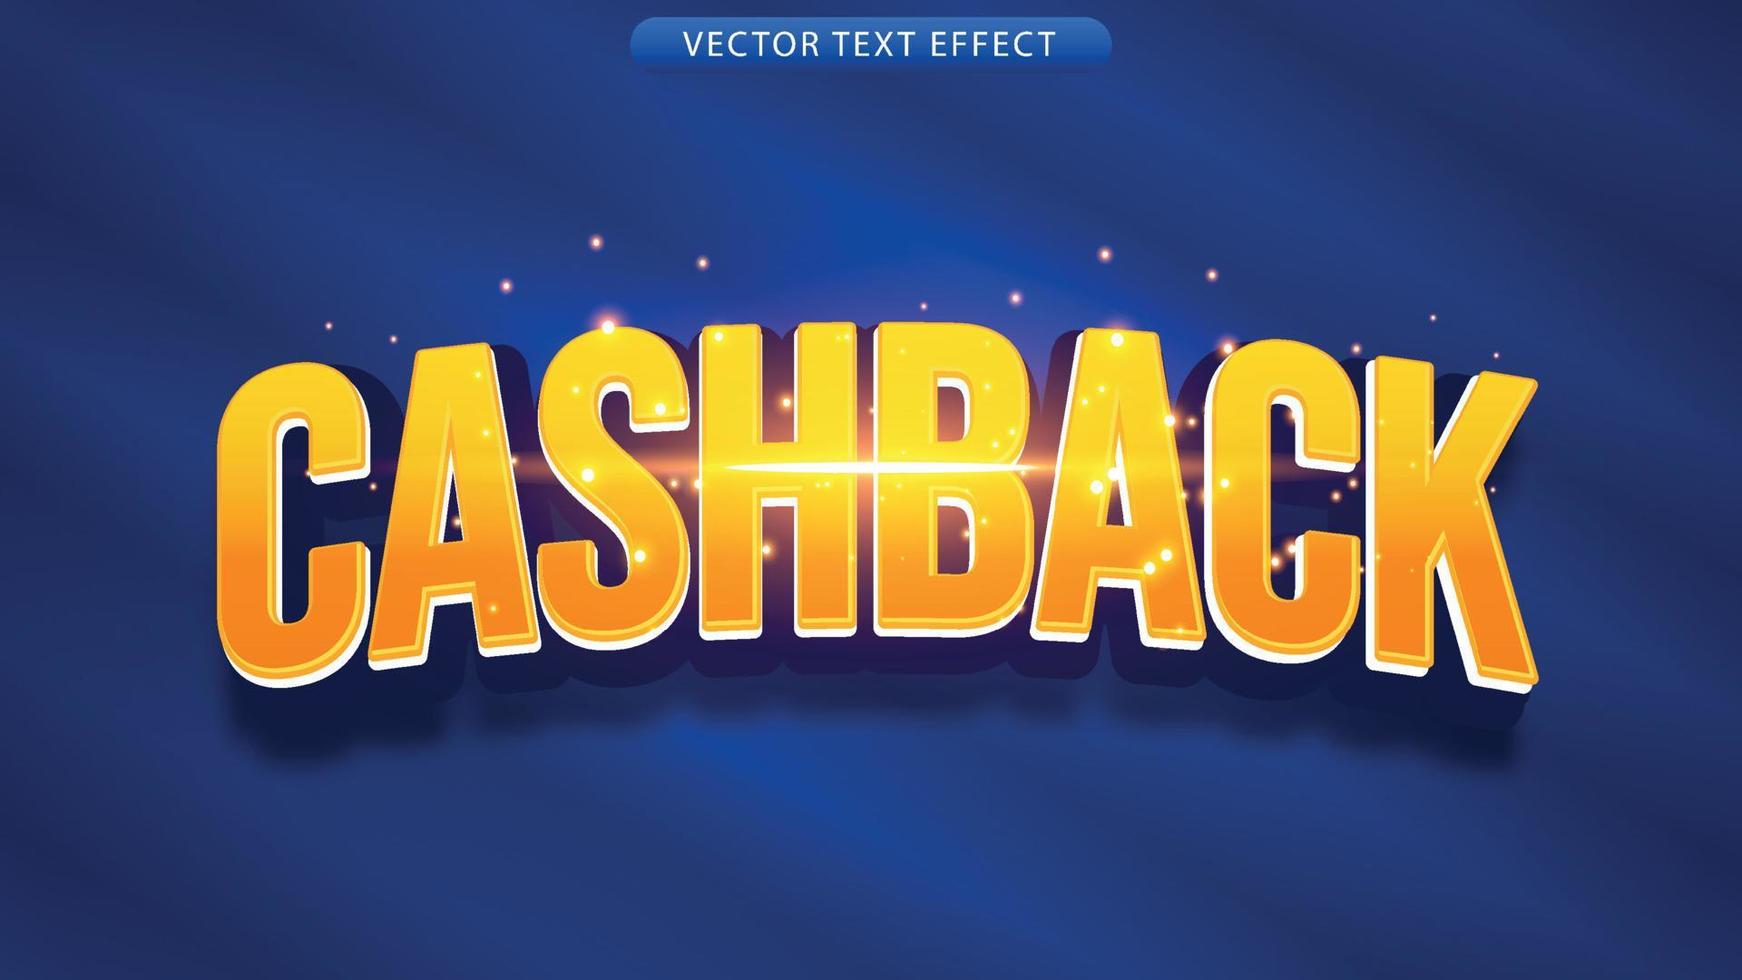 3D cashback text with light ornament luxury vector file